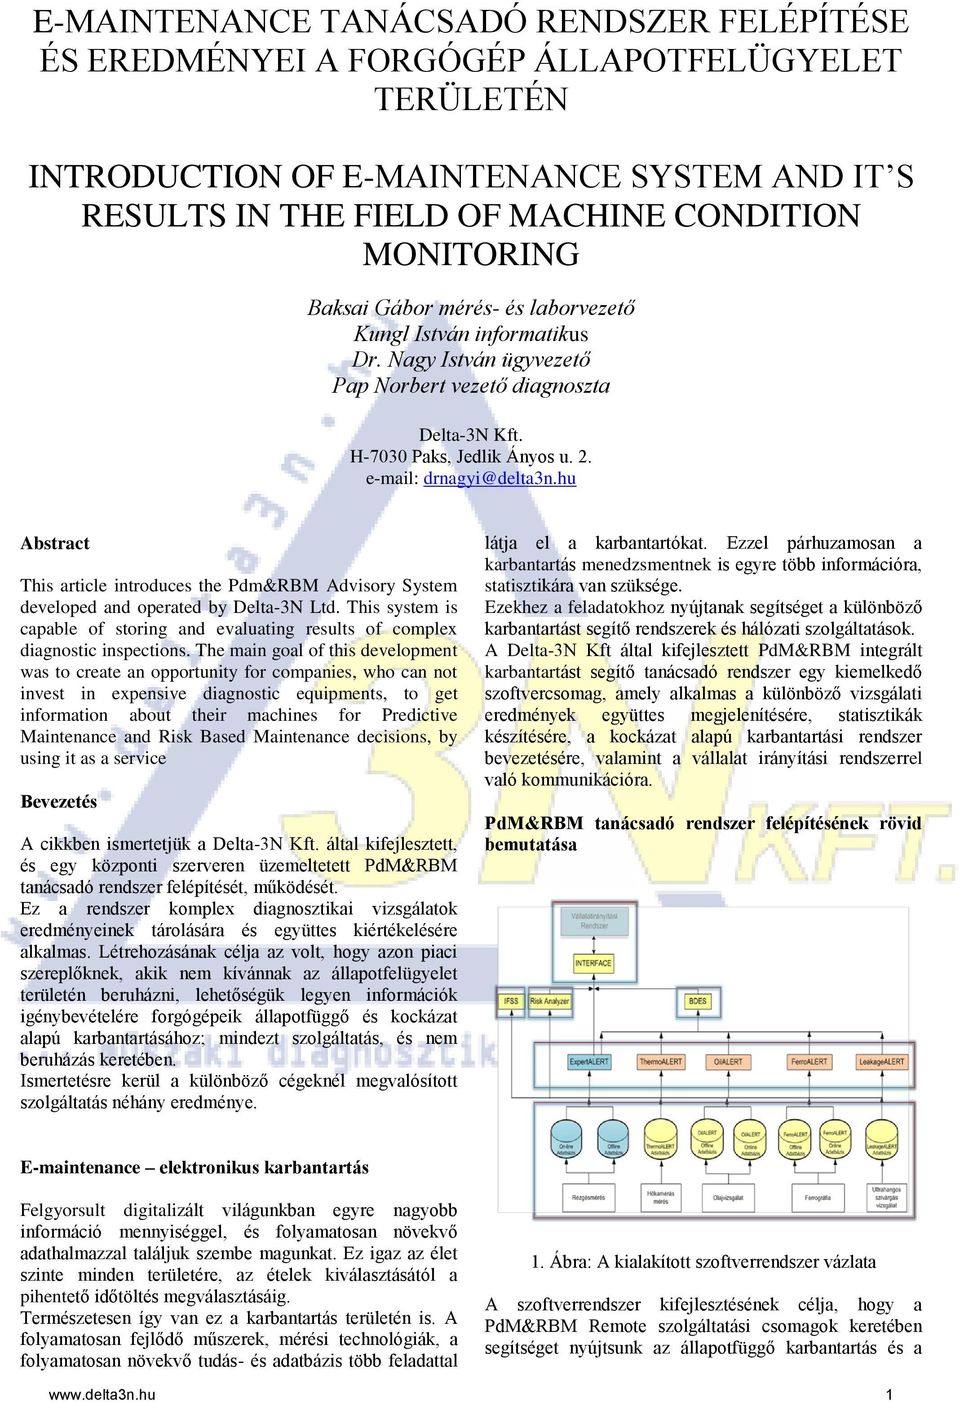 hu Abstract This article introduces the Pdm&RBM Advisory System developed and operated by Delta-3N Ltd. This system is capable of storing and evaluating results of complex diagnostic inspections.